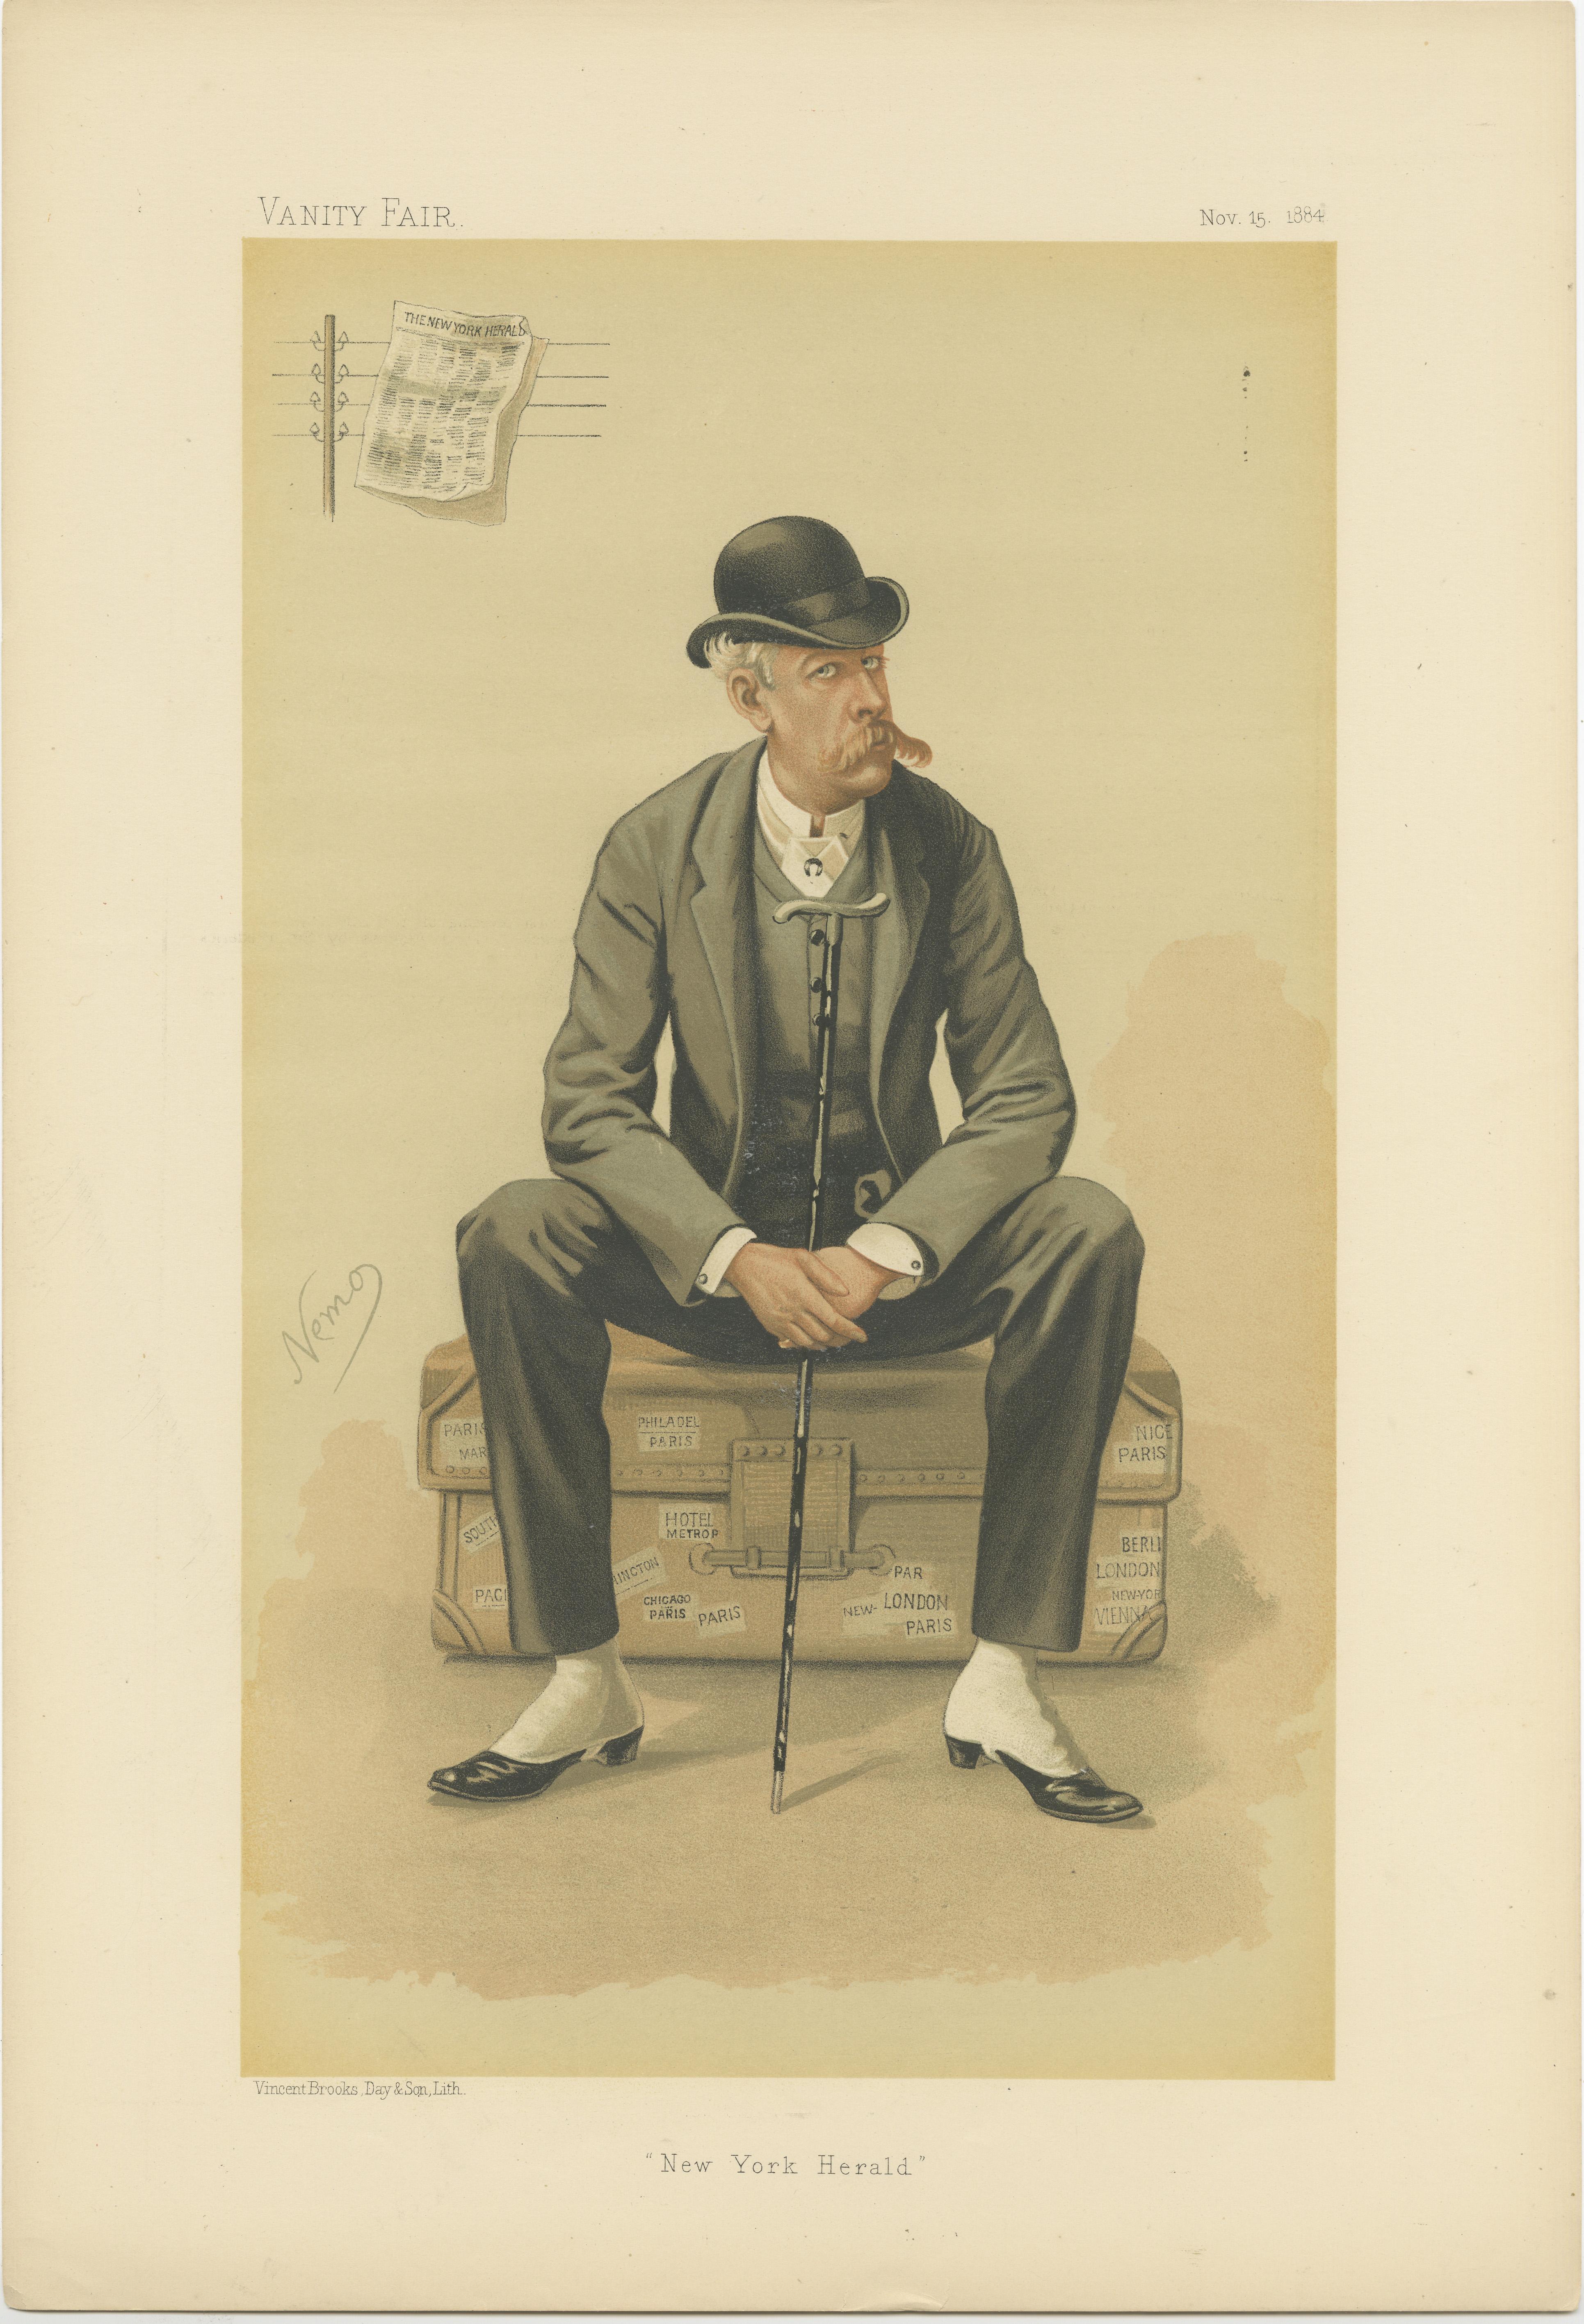 Chromolithograph titled 'New York Herald'. Lithograph of James Gordon Bennett Jr. publisher of the New York Herald, founded by his father, James Gordon Bennett Sr. (1795–1872), who emigrated from Scotland. He was generally known as Gordon Bennett to